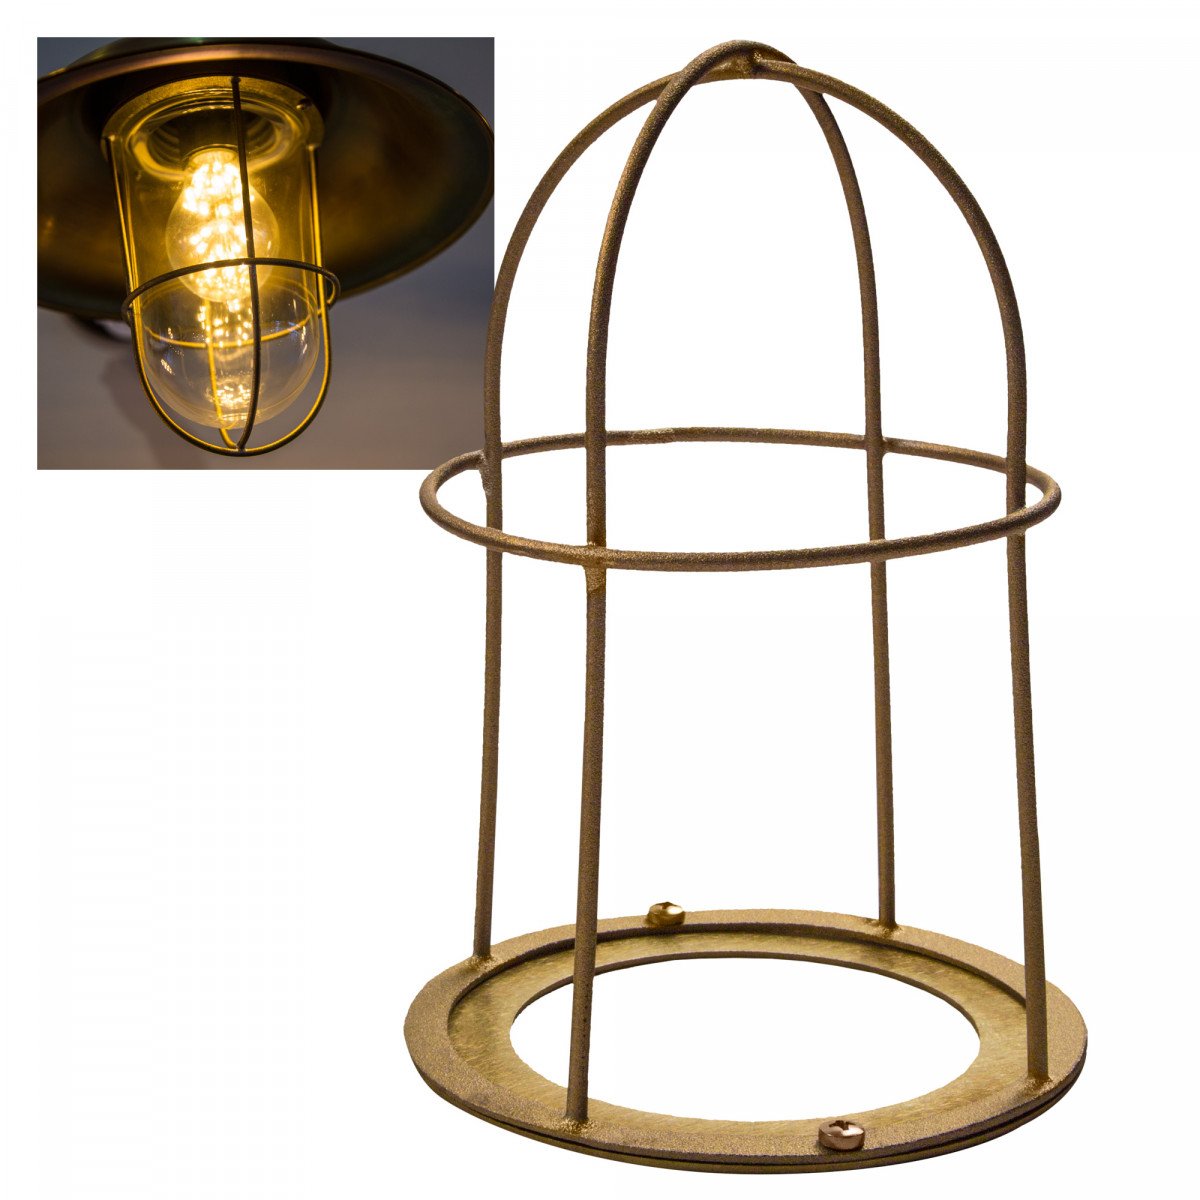 Cage for barn lights